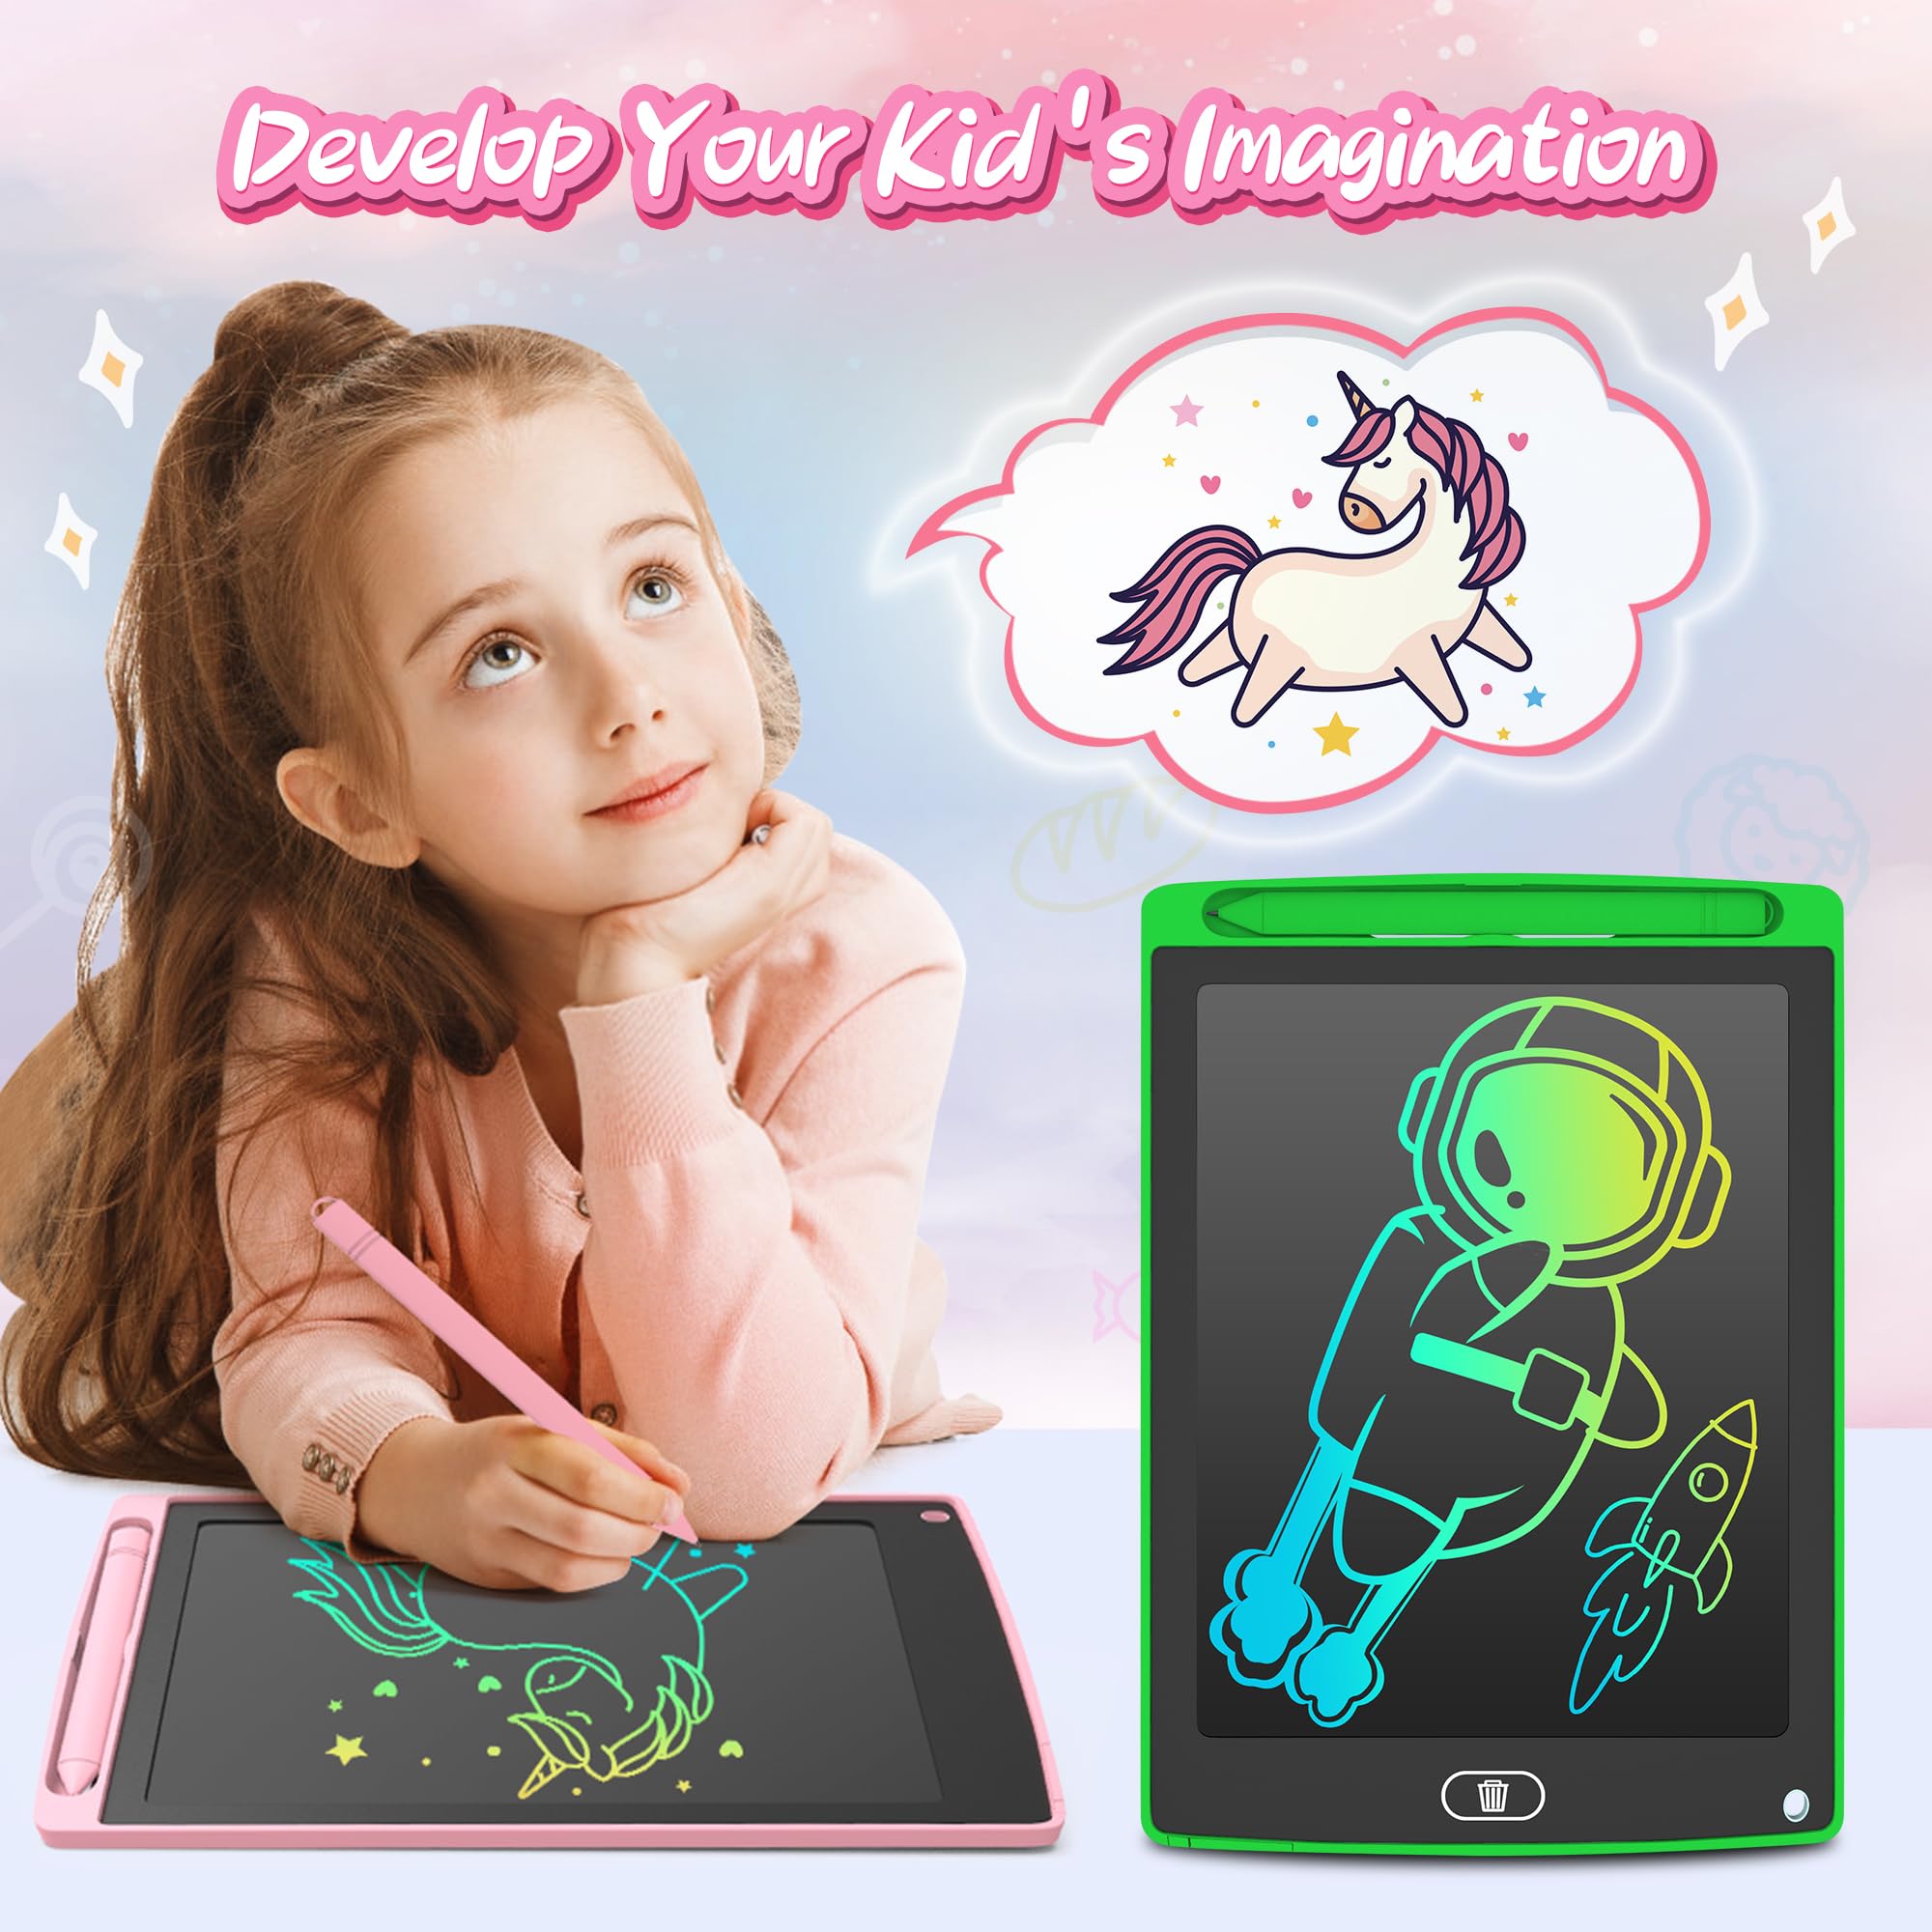 LEYAOYAO 2 Pack LCD Writing Tablet 8.5inch with Bag - Colorful Screen Doodle Pad Drawing Board Learning Educational Toy - Gift for Kids 3-6 Years Old Girl Boy (GreenandPink)